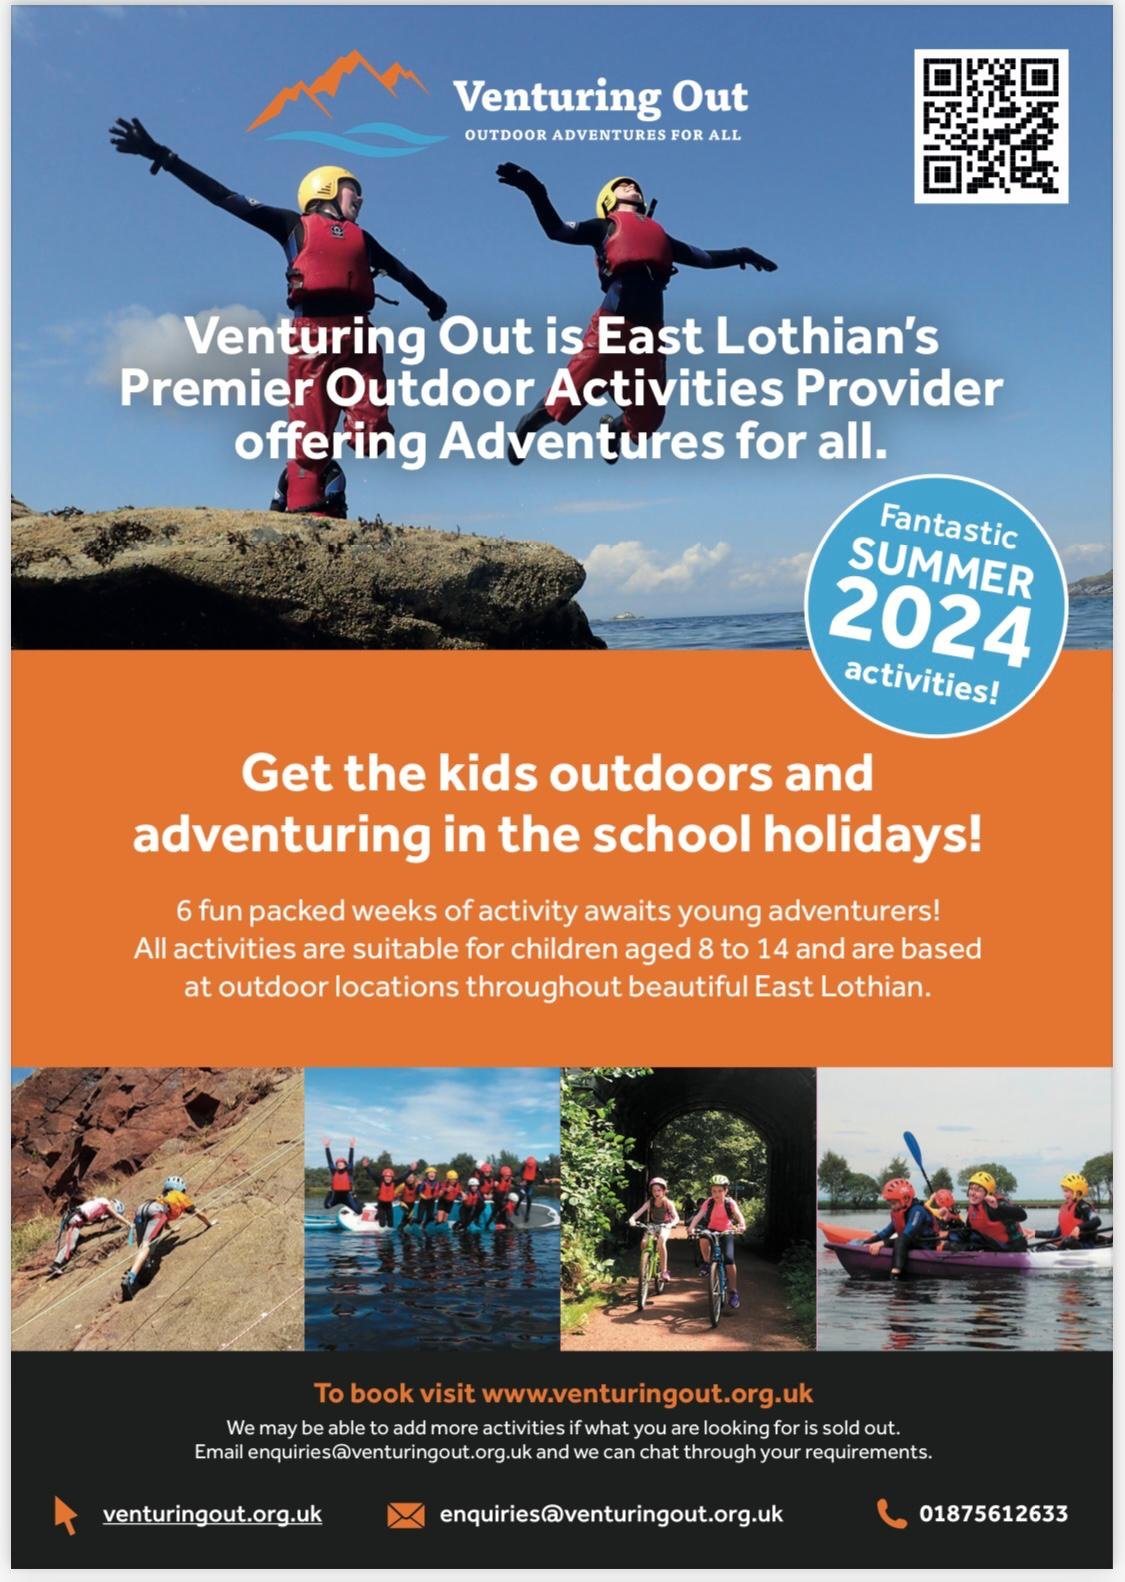 ⏰⏰Sett your alarms!!⏰⏰

Venturing Out&rsquo;s Summer Holiday Programme will go live for bookings at 7pm on Friday 3rd May&hellip;this Friday! We have a fun packed programme ready for kids aged 8 to 14. 🚵🚣🧗🗺🌳

All activities can be found on our w